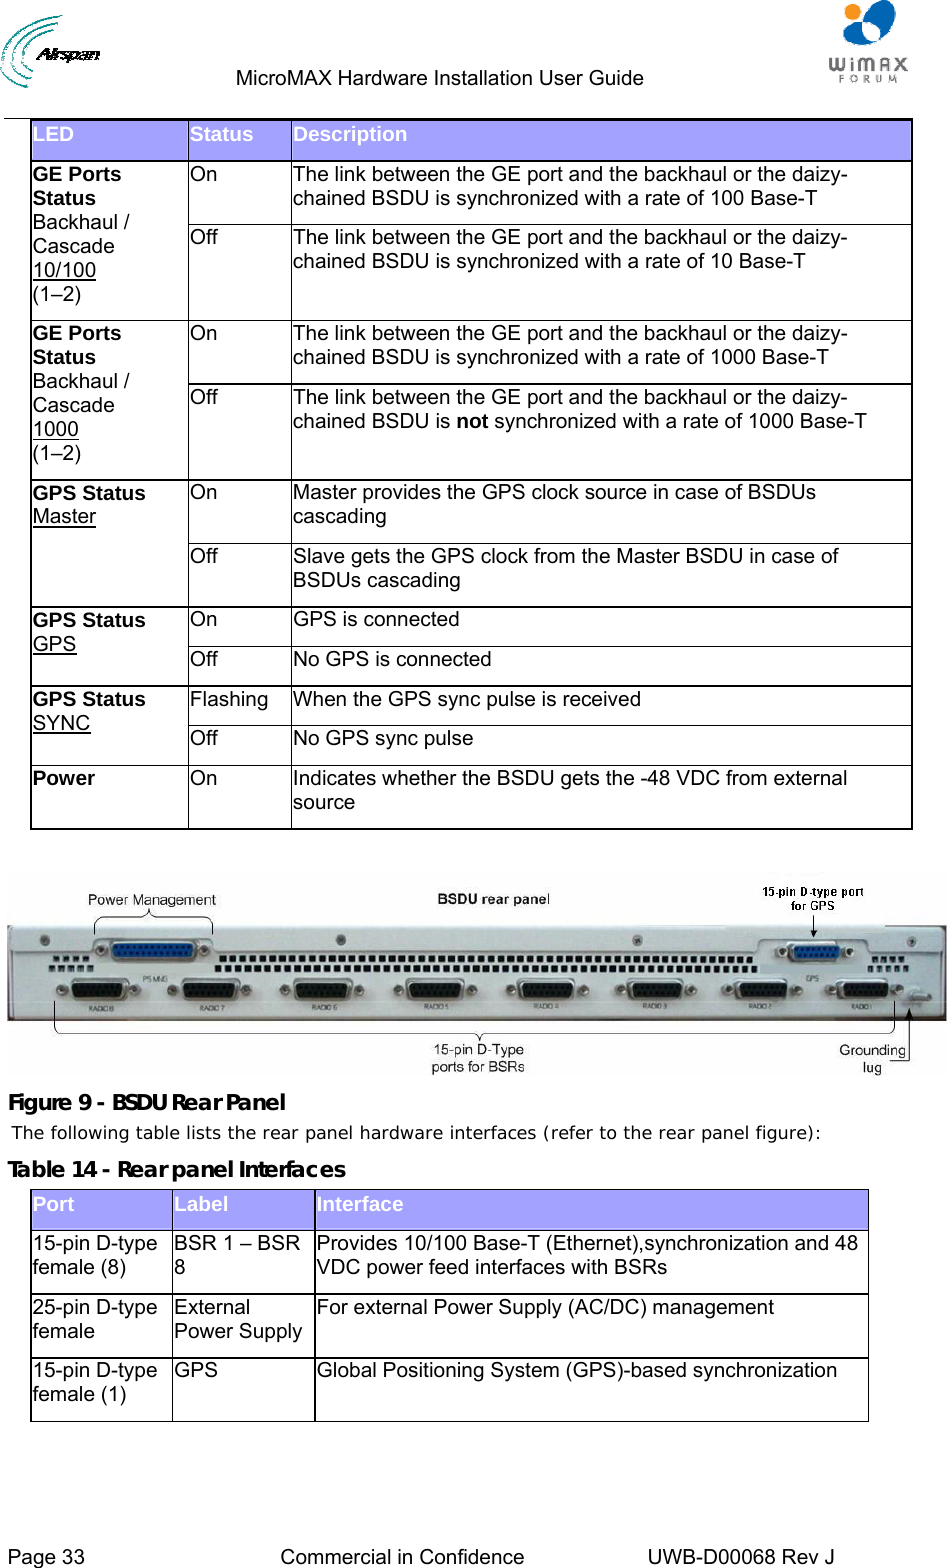                                  MicroMAX Hardware Installation User Guide     Page 33  Commercial in Confidence  UWB-D00068 Rev J   LED  Status  Description On  The link between the GE port and the backhaul or the daizy-chained BSDU is synchronized with a rate of 100 Base-T GE Ports Status Backhaul / Cascade 10/100 (1–2) Off  The link between the GE port and the backhaul or the daizy-chained BSDU is synchronized with a rate of 10 Base-T On  The link between the GE port and the backhaul or the daizy-chained BSDU is synchronized with a rate of 1000 Base-T GE Ports Status Backhaul / Cascade 1000 (1–2) Off  The link between the GE port and the backhaul or the daizy-chained BSDU is not synchronized with a rate of 1000 Base-T On  Master provides the GPS clock source in case of BSDUs cascading GPS Status Master Off  Slave gets the GPS clock from the Master BSDU in case of BSDUs cascading On  GPS is connected GPS Status GPS Off  No GPS is connected Flashing  When the GPS sync pulse is received GPS Status SYNC Off  No GPS sync pulse Power  On  Indicates whether the BSDU gets the -48 VDC from external source   Figure 9 - BSDU Rear Panel The following table lists the rear panel hardware interfaces (refer to the rear panel figure): Table 14 - Rear panel Interfaces Port  Label  Interface 15-pin D-type female (8)  BSR 1 – BSR 8  Provides 10/100 Base-T (Ethernet),synchronization and 48 VDC power feed interfaces with BSRs 25-pin D-type female External Power Supply For external Power Supply (AC/DC)  management 15-pin D-type female (1) GPS  Global Positioning System (GPS)-based synchronization 